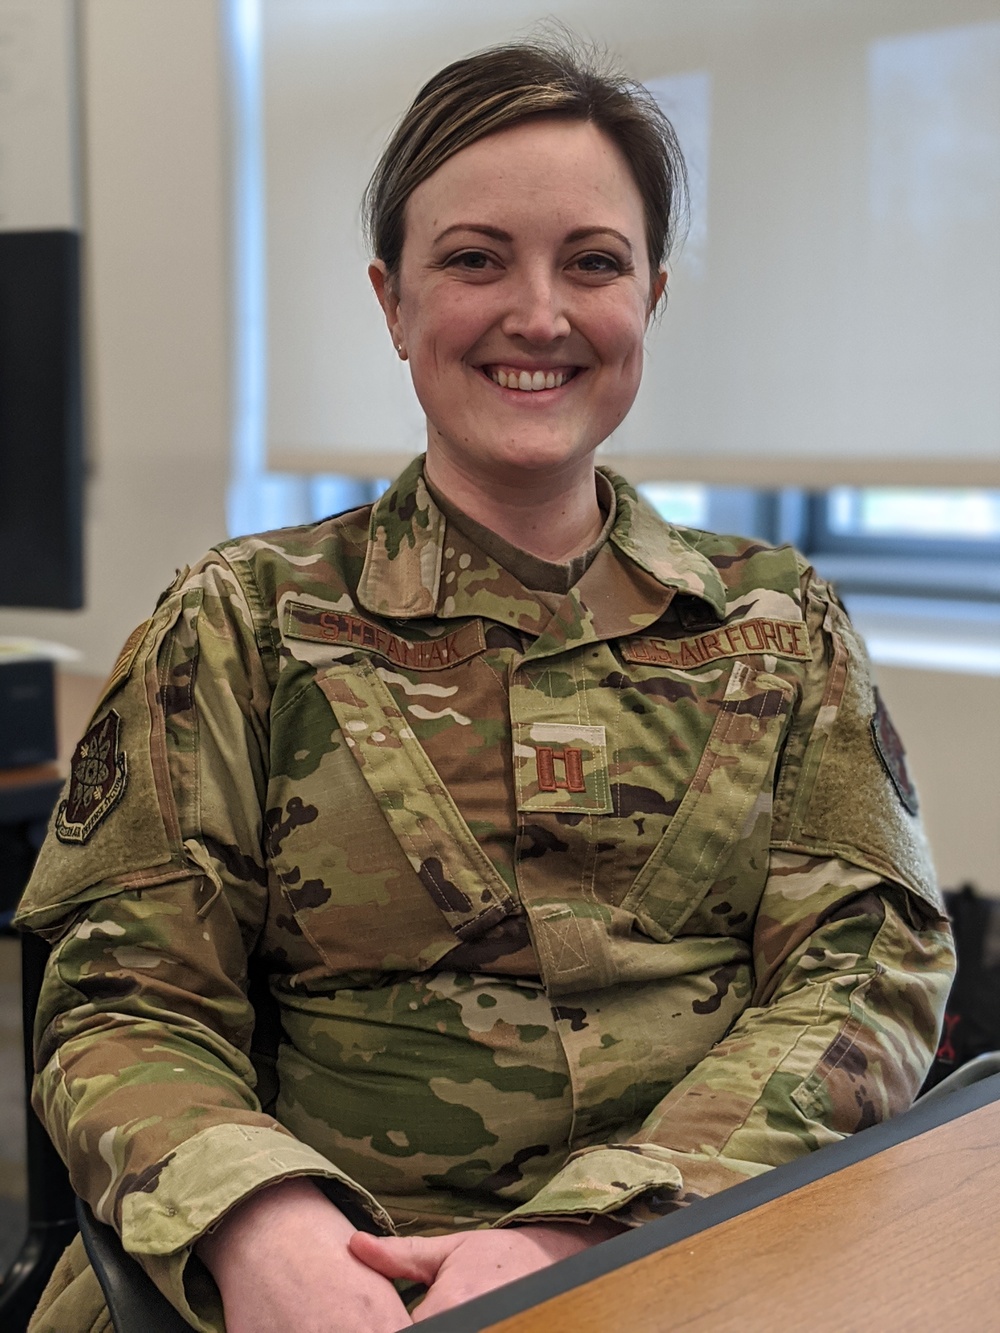 From Landslides and Wildfires to COVID-19: WADS Airman Answers the Call